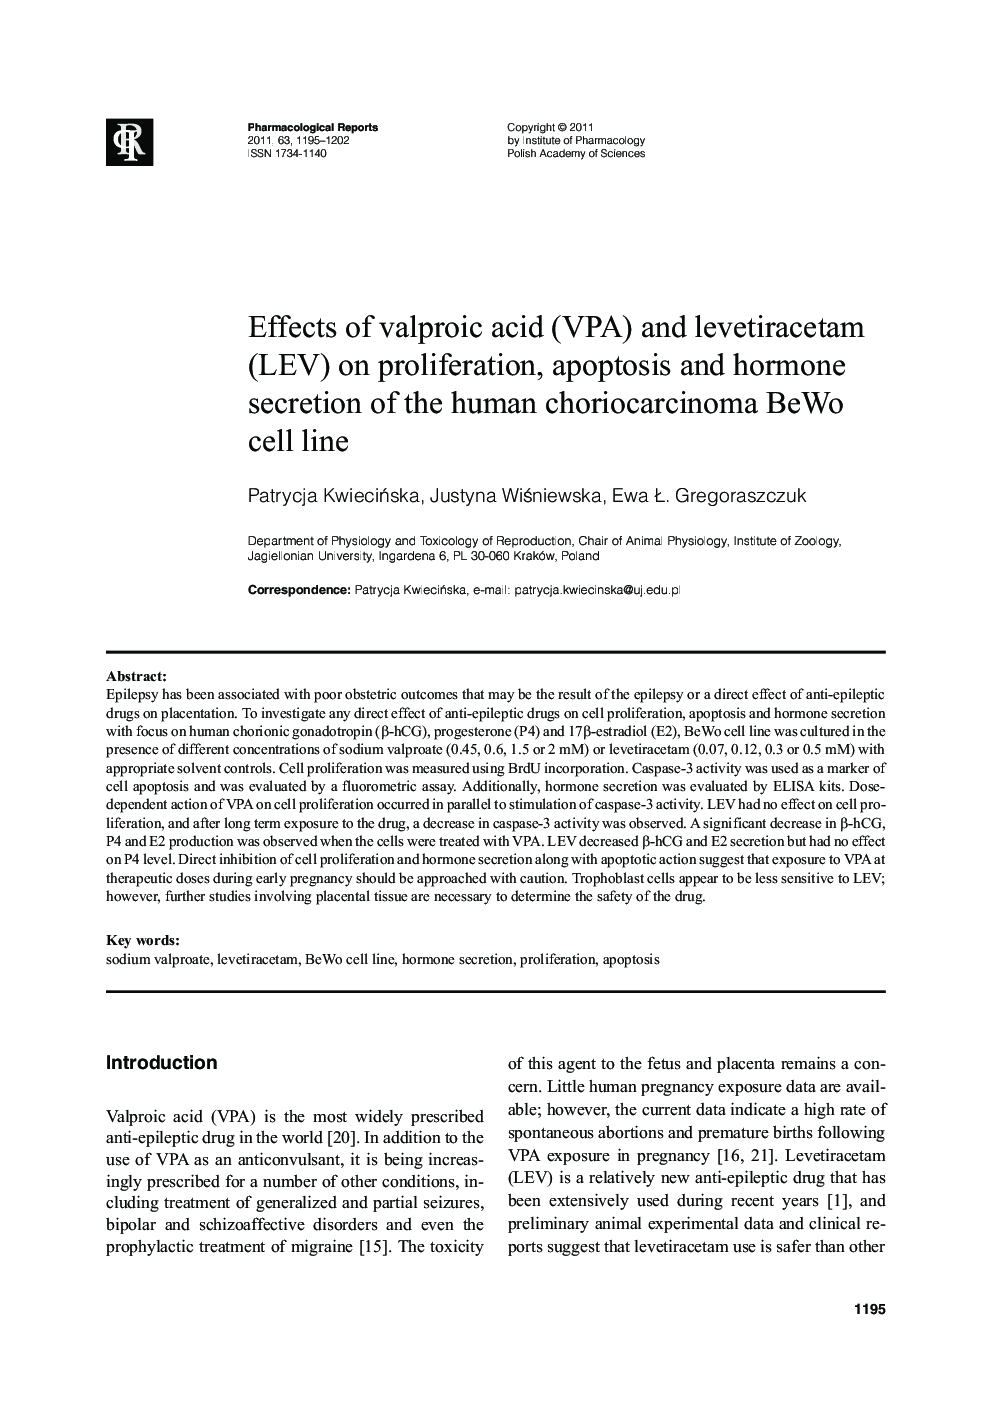 Effects of valproic acid (VPA) and levetiracetam (LEV) on proliferation, apoptosis and hormone secretion of the human choriocarcinoma BeWo cell line